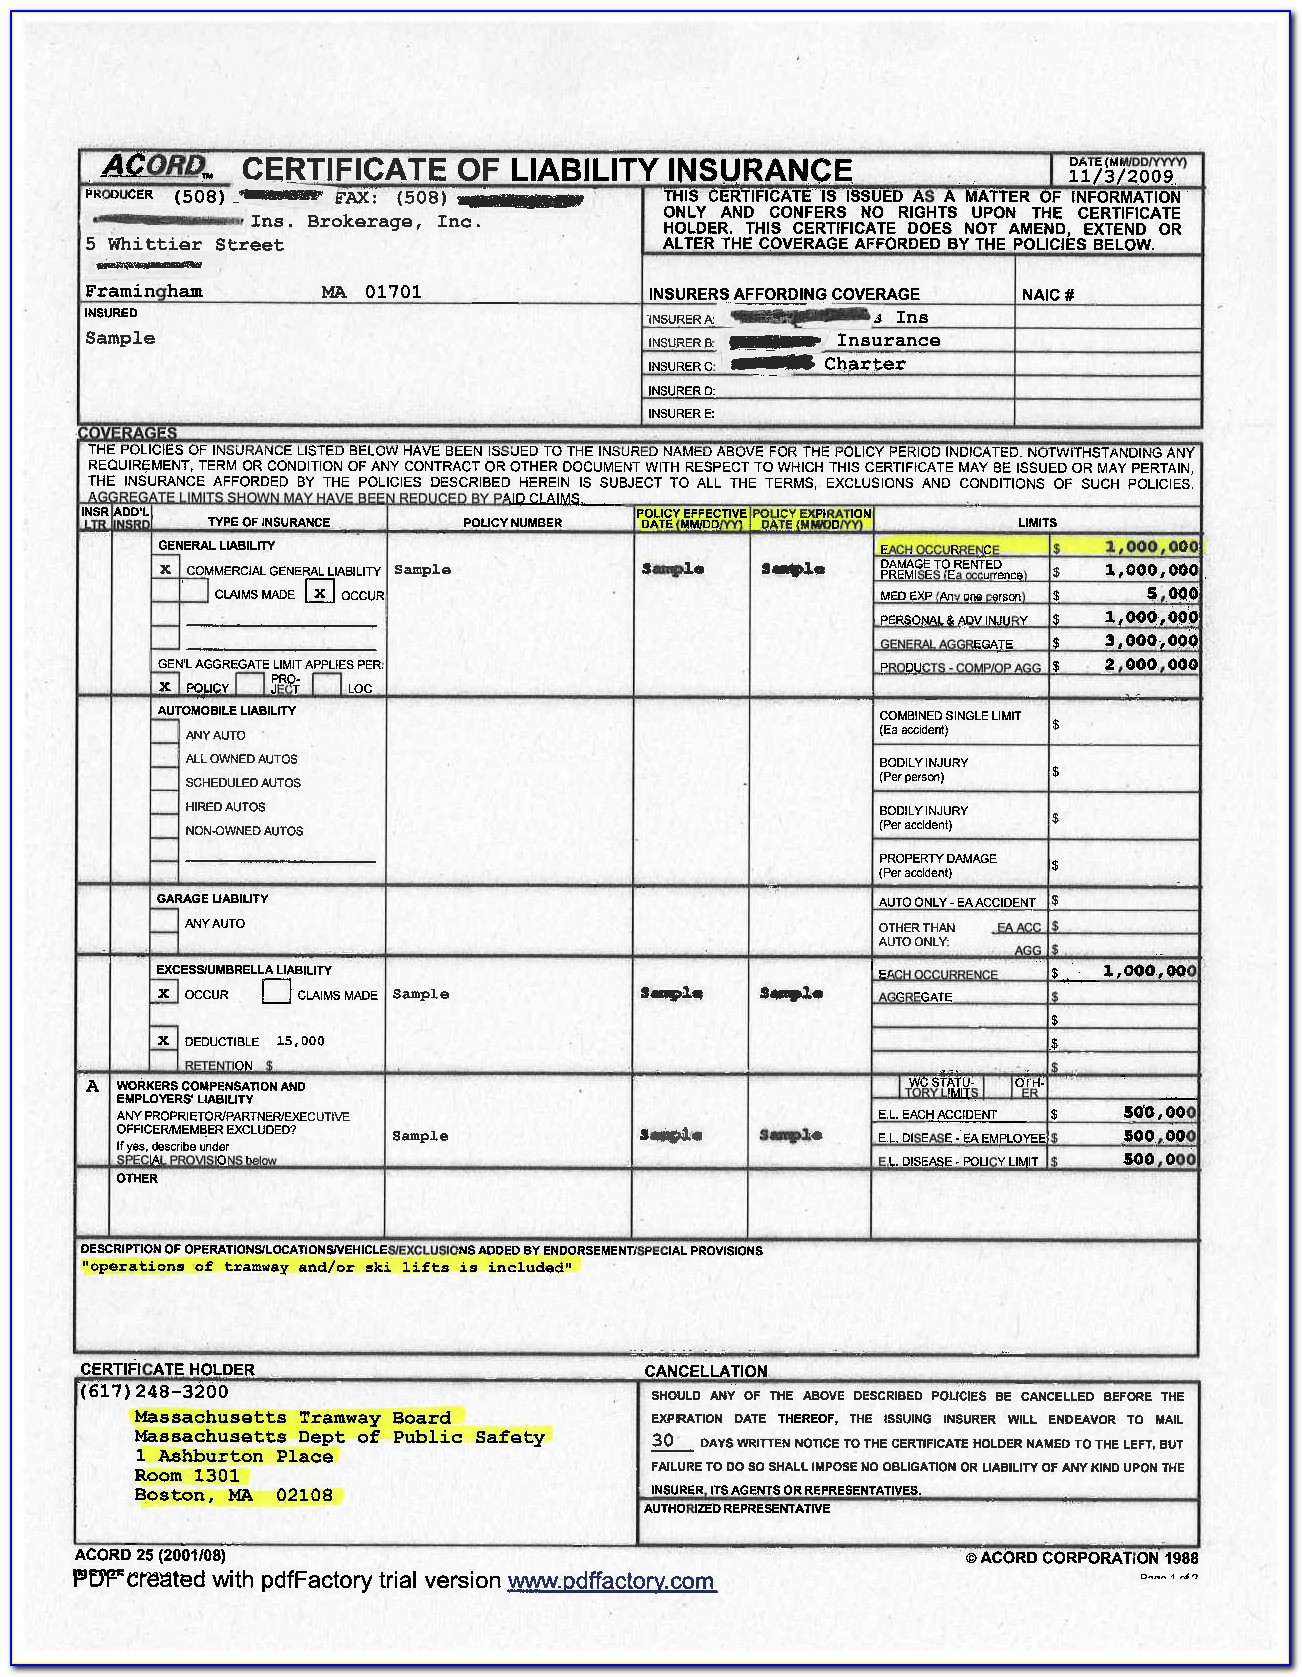 Iso General Liability Policy Form 2013